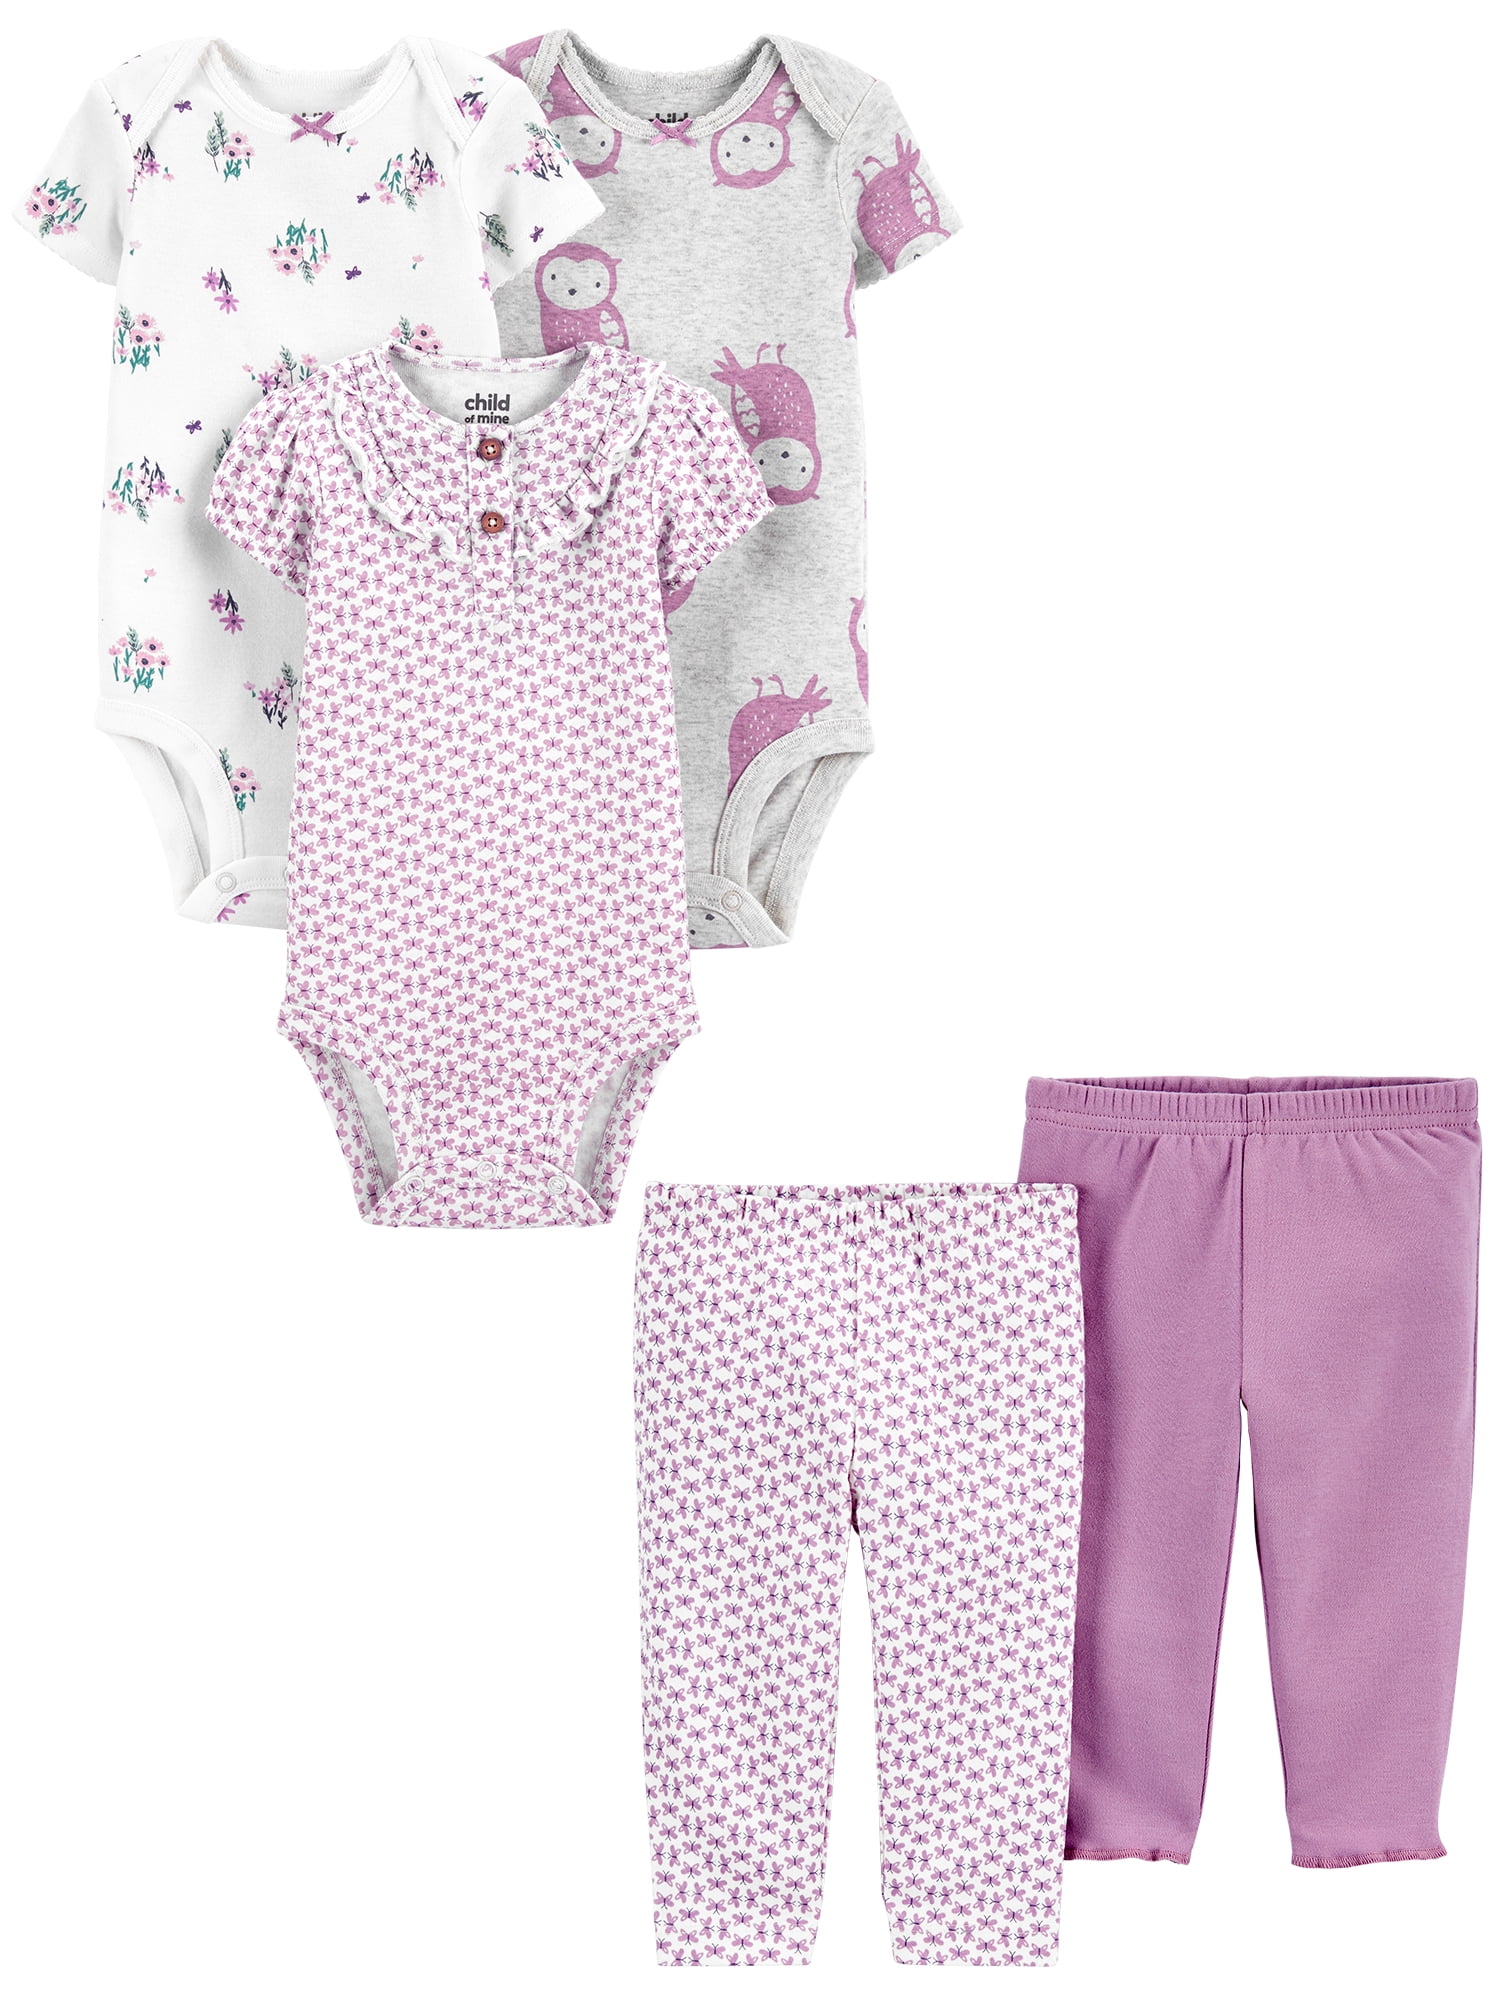 Carter's Child of Mine Baby Boys Bodysuit & Pants Outfit Set, 5-Piece,  Preemie-24 Months 